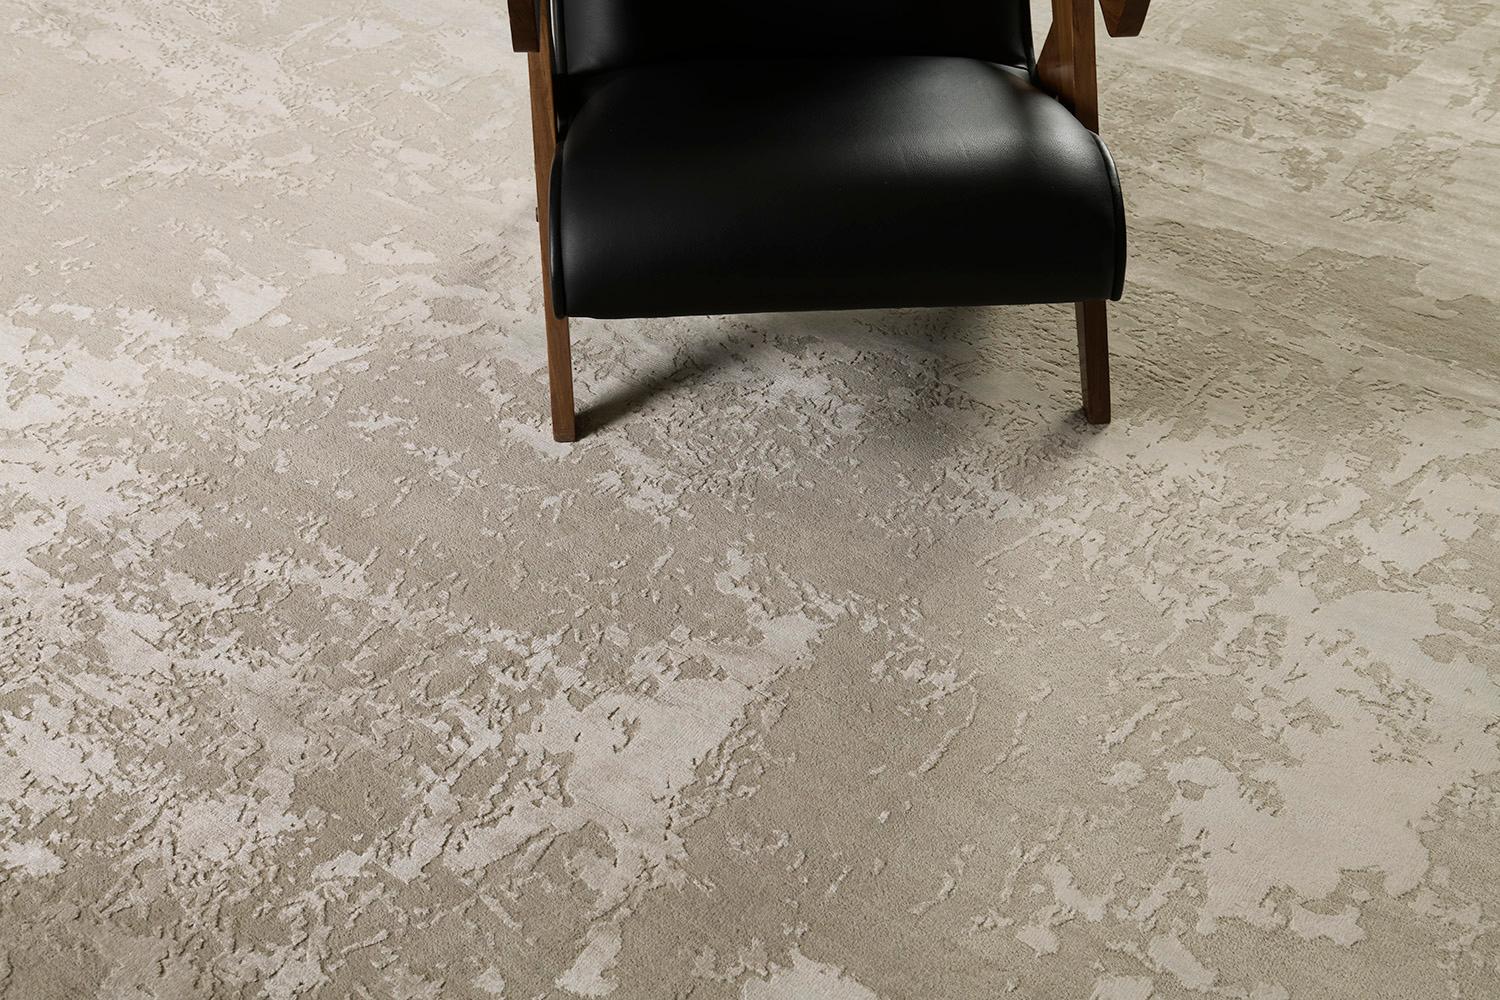 A modern design rug in Mezzo Collection reveals the breathtaking art form. This captivating rug will definitely leave you in awe upon laying your eyes on this wool and silk embossed rug. Featuring soothing earthy tones, this rug creates an artistic